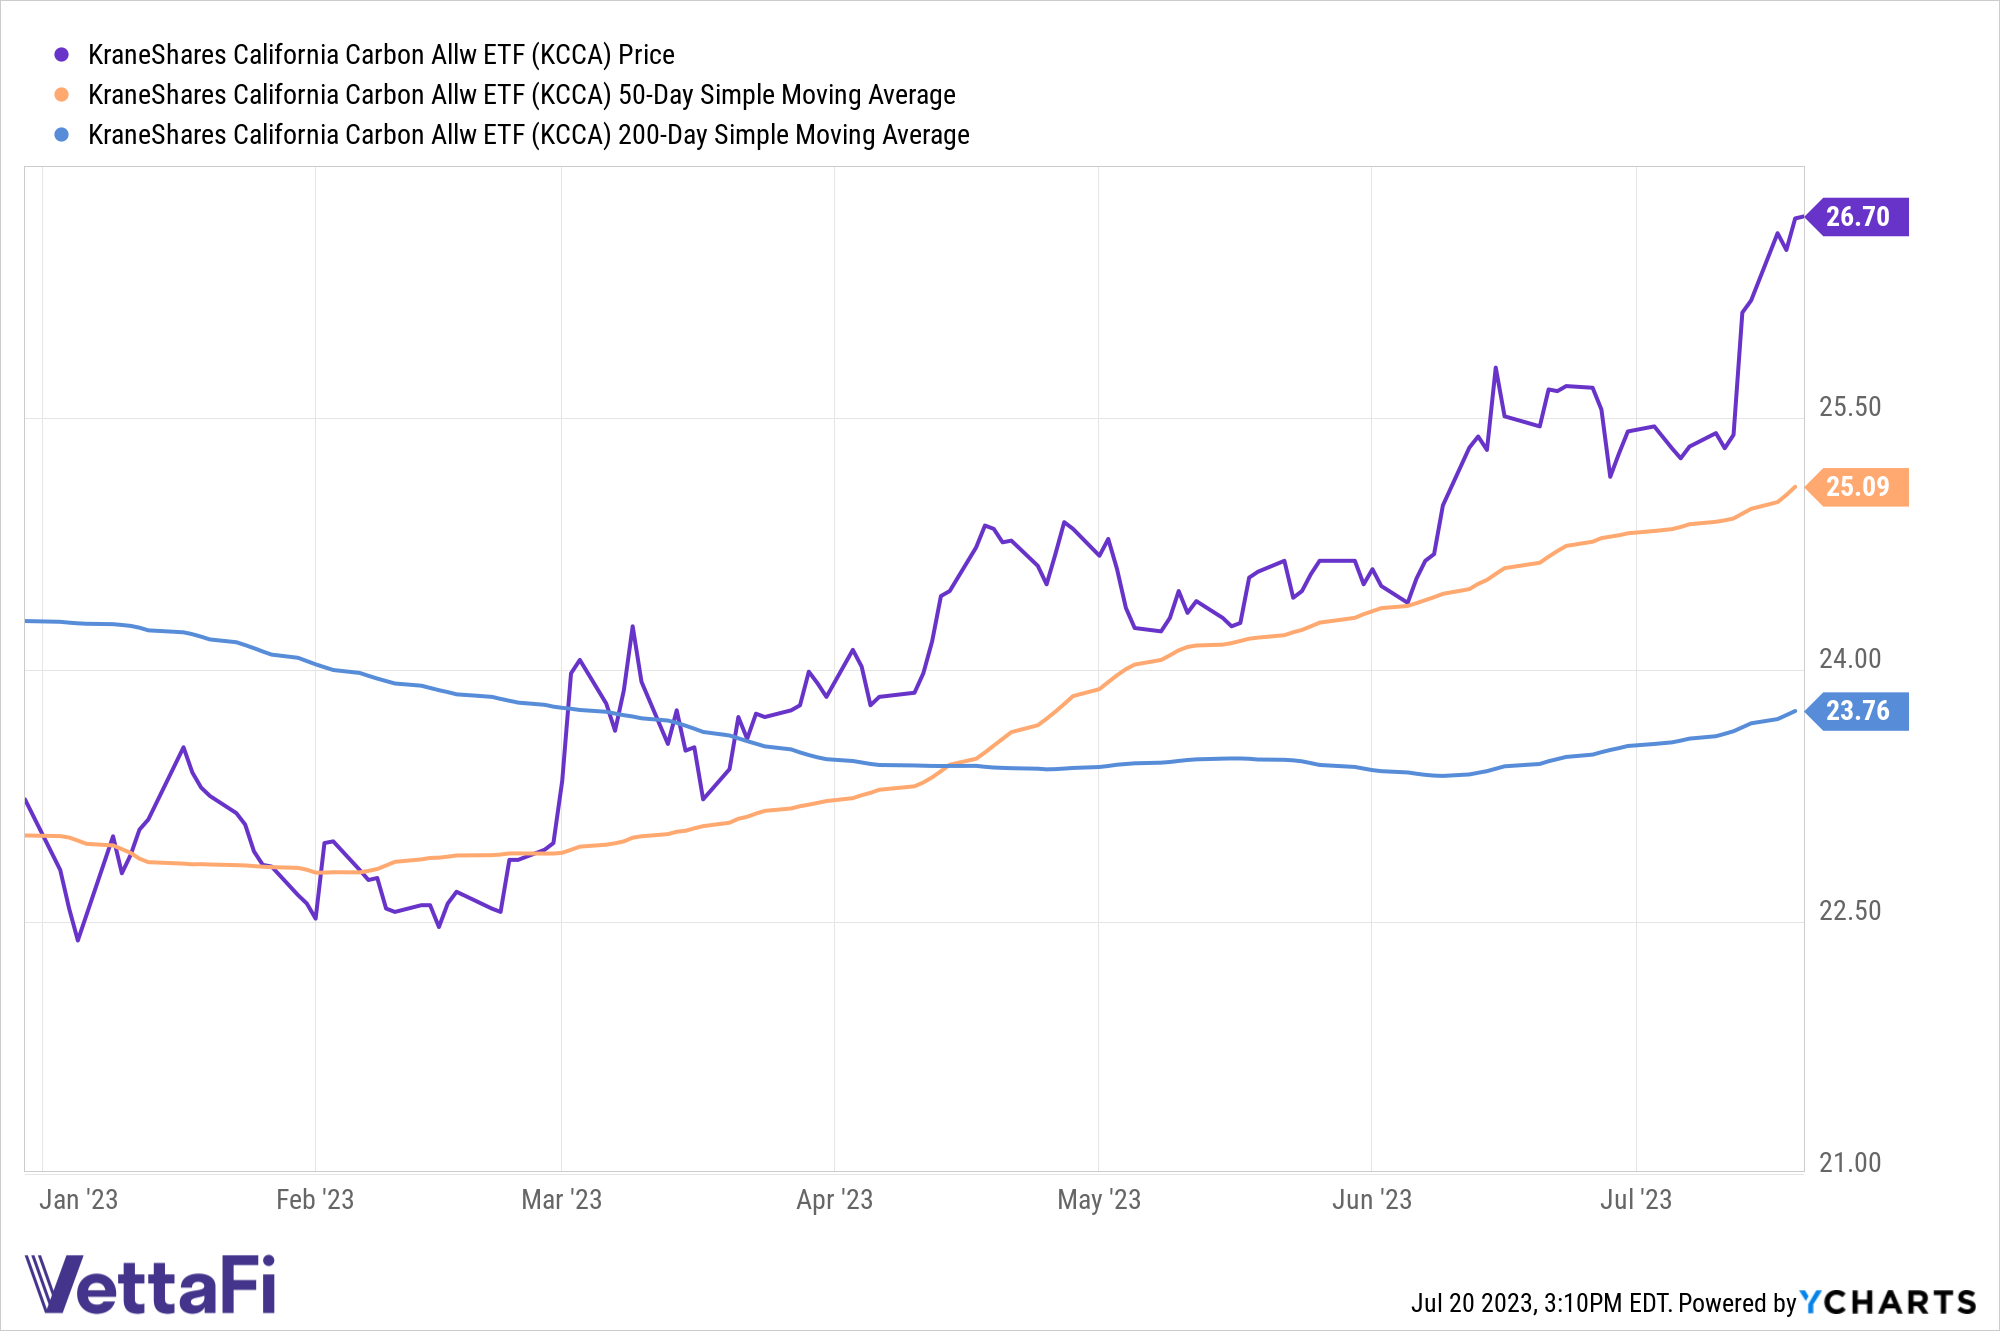 Price graph of KCCA YTD, currently at 26.70, well above its 50-day SMA of 25.09 and its 200-day SMA of 23.76.